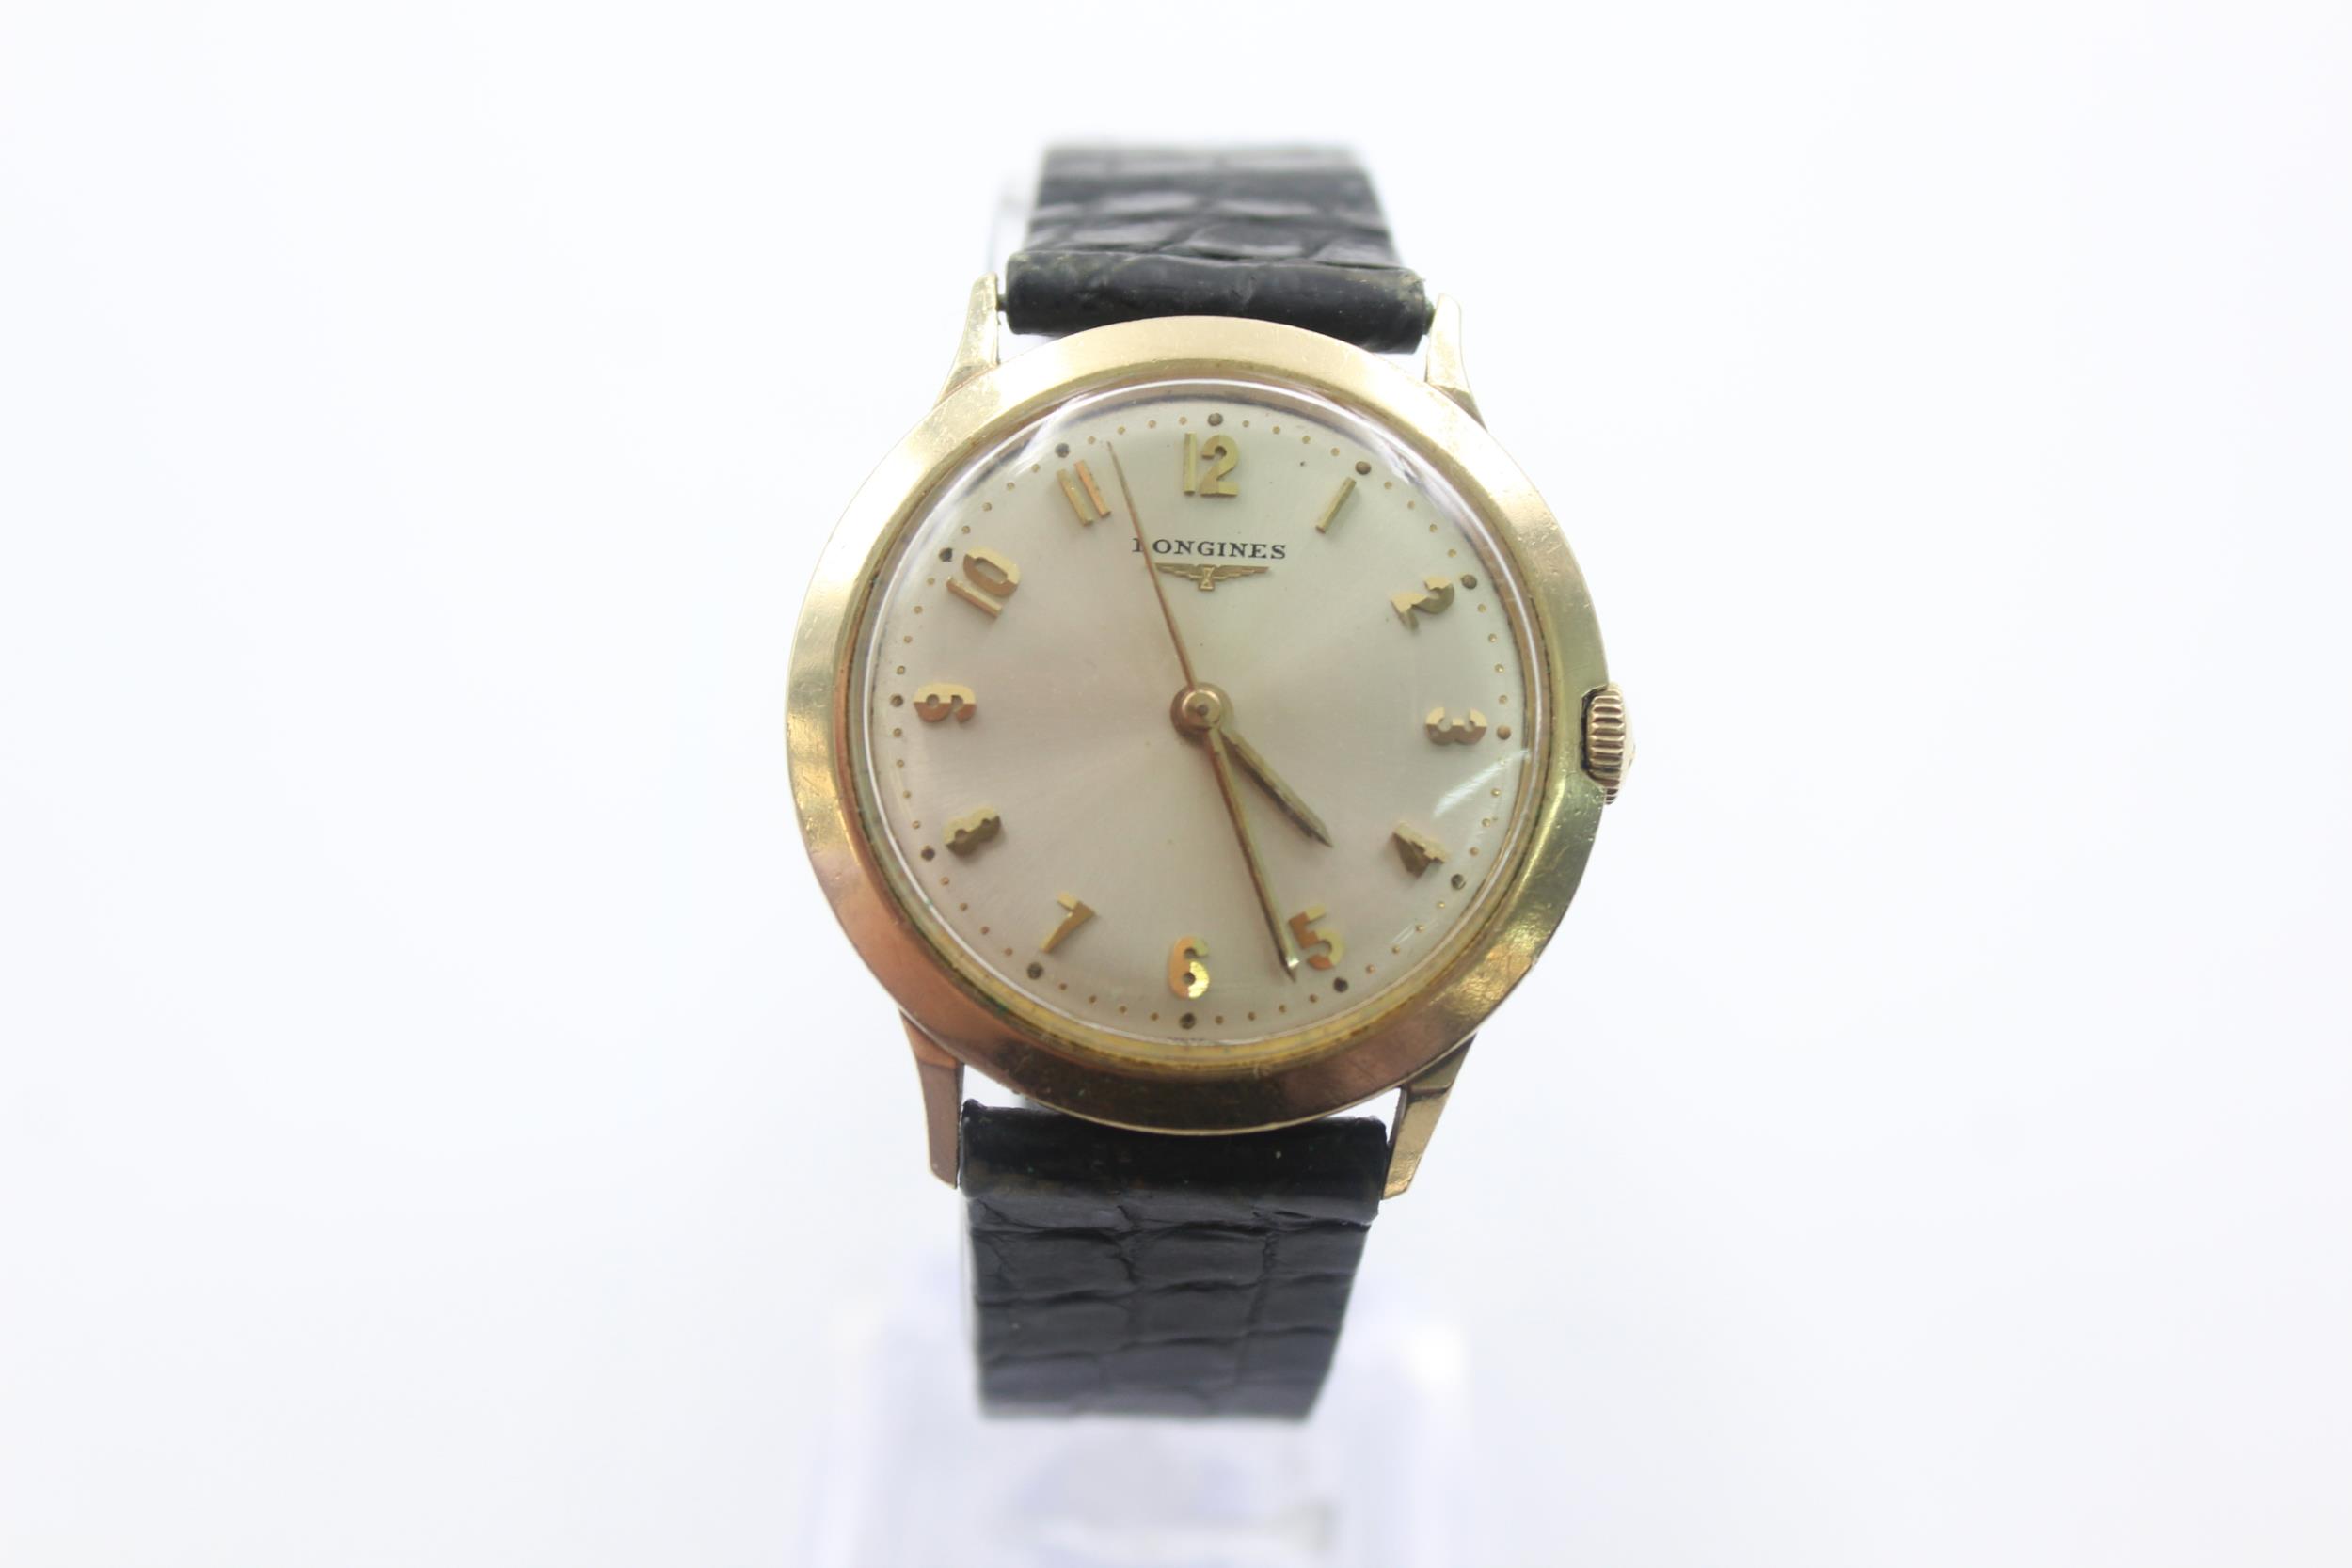 Vintage Gents LONGINES 10k Gold Capped Dress Style WRISTWATCH Hand-Wind WORKING